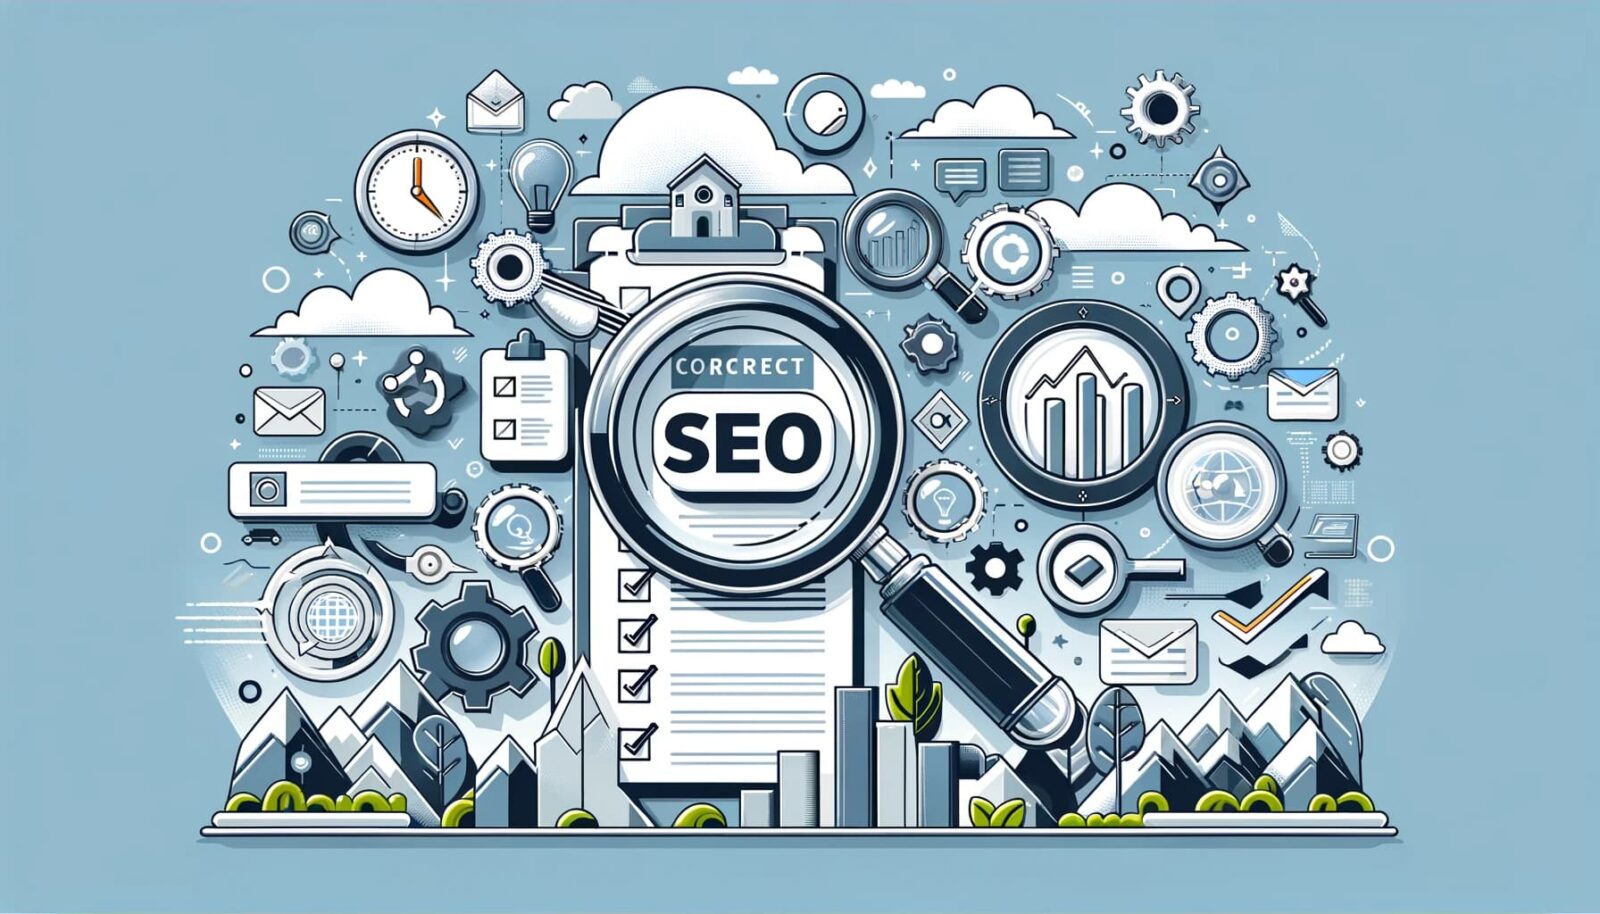 _The Correct Process for an Effective SEO Strategy._